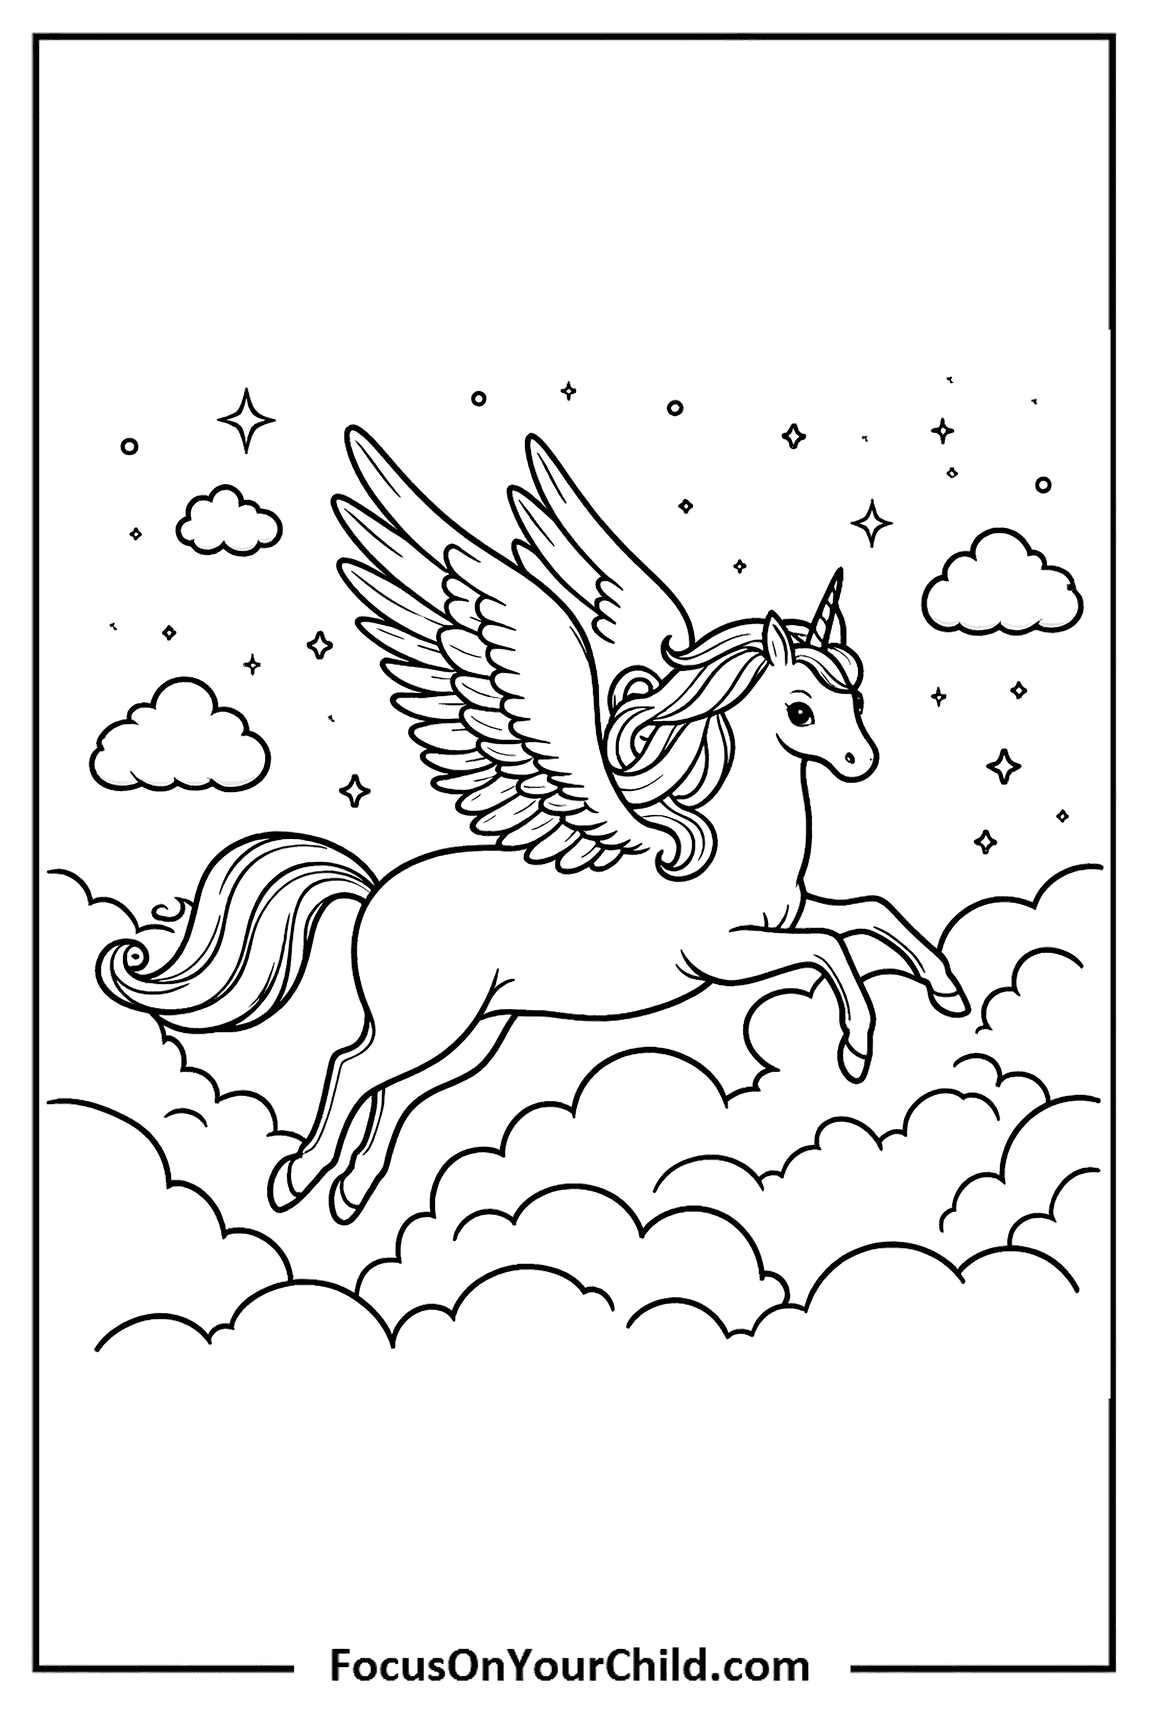 Majestic winged unicorn soaring through sky with clouds and stars.